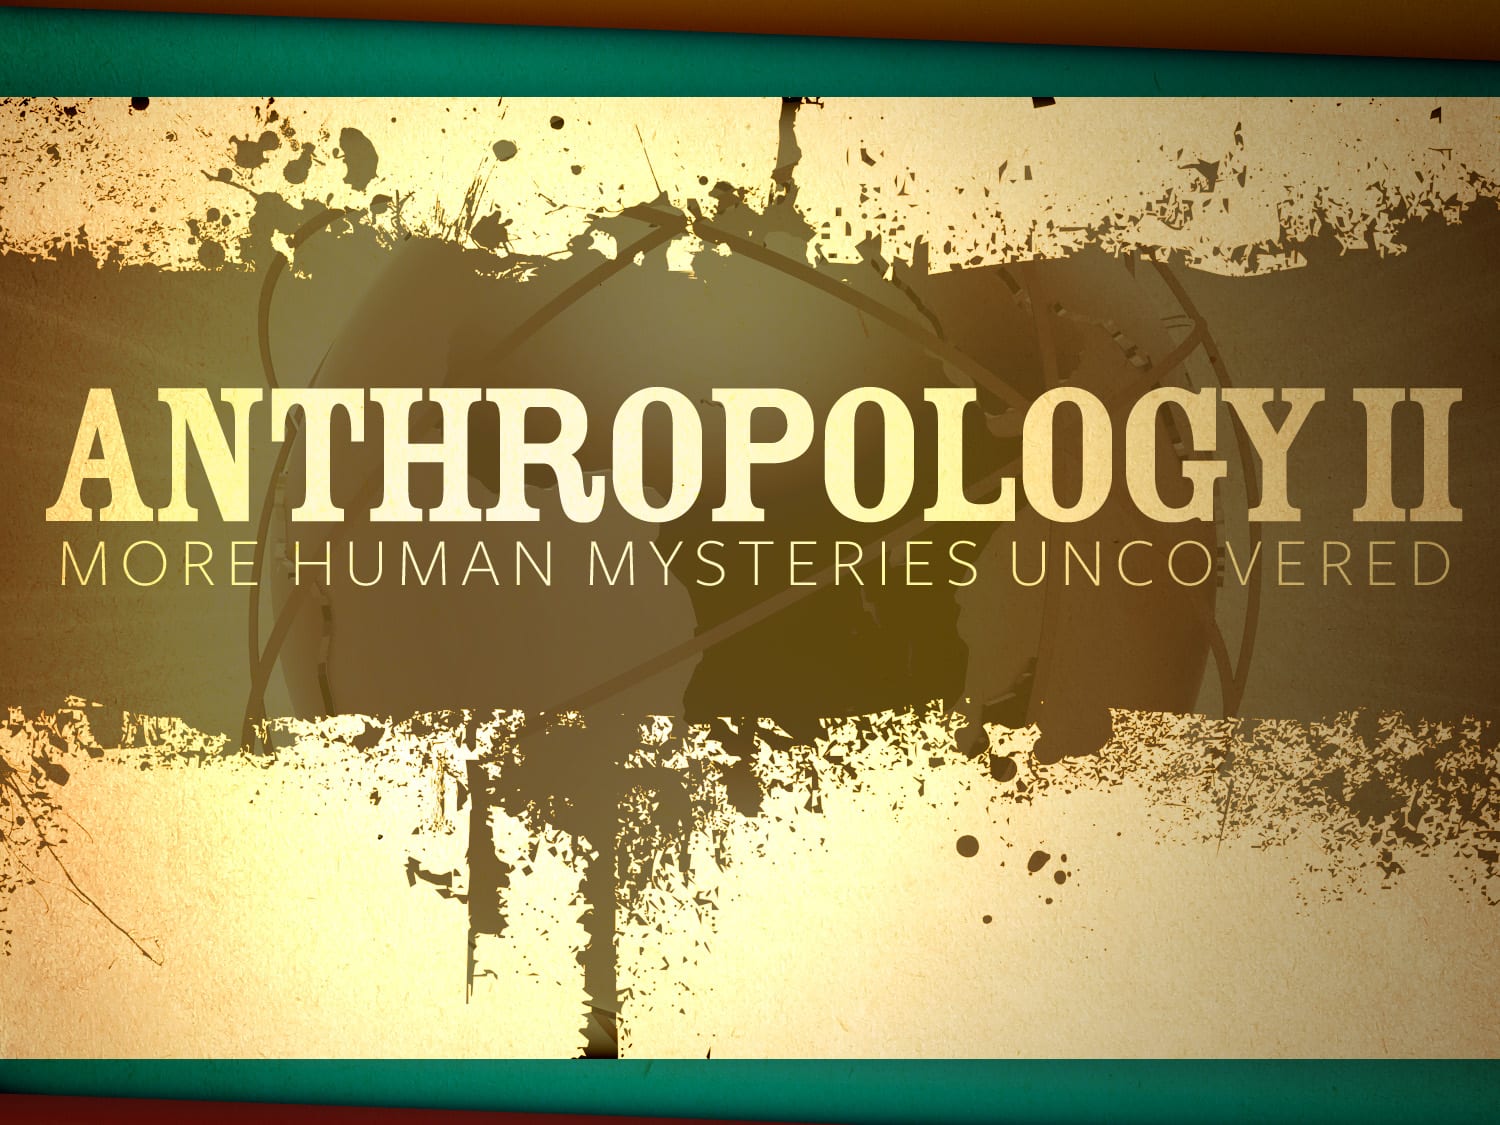 Anthropology II Course